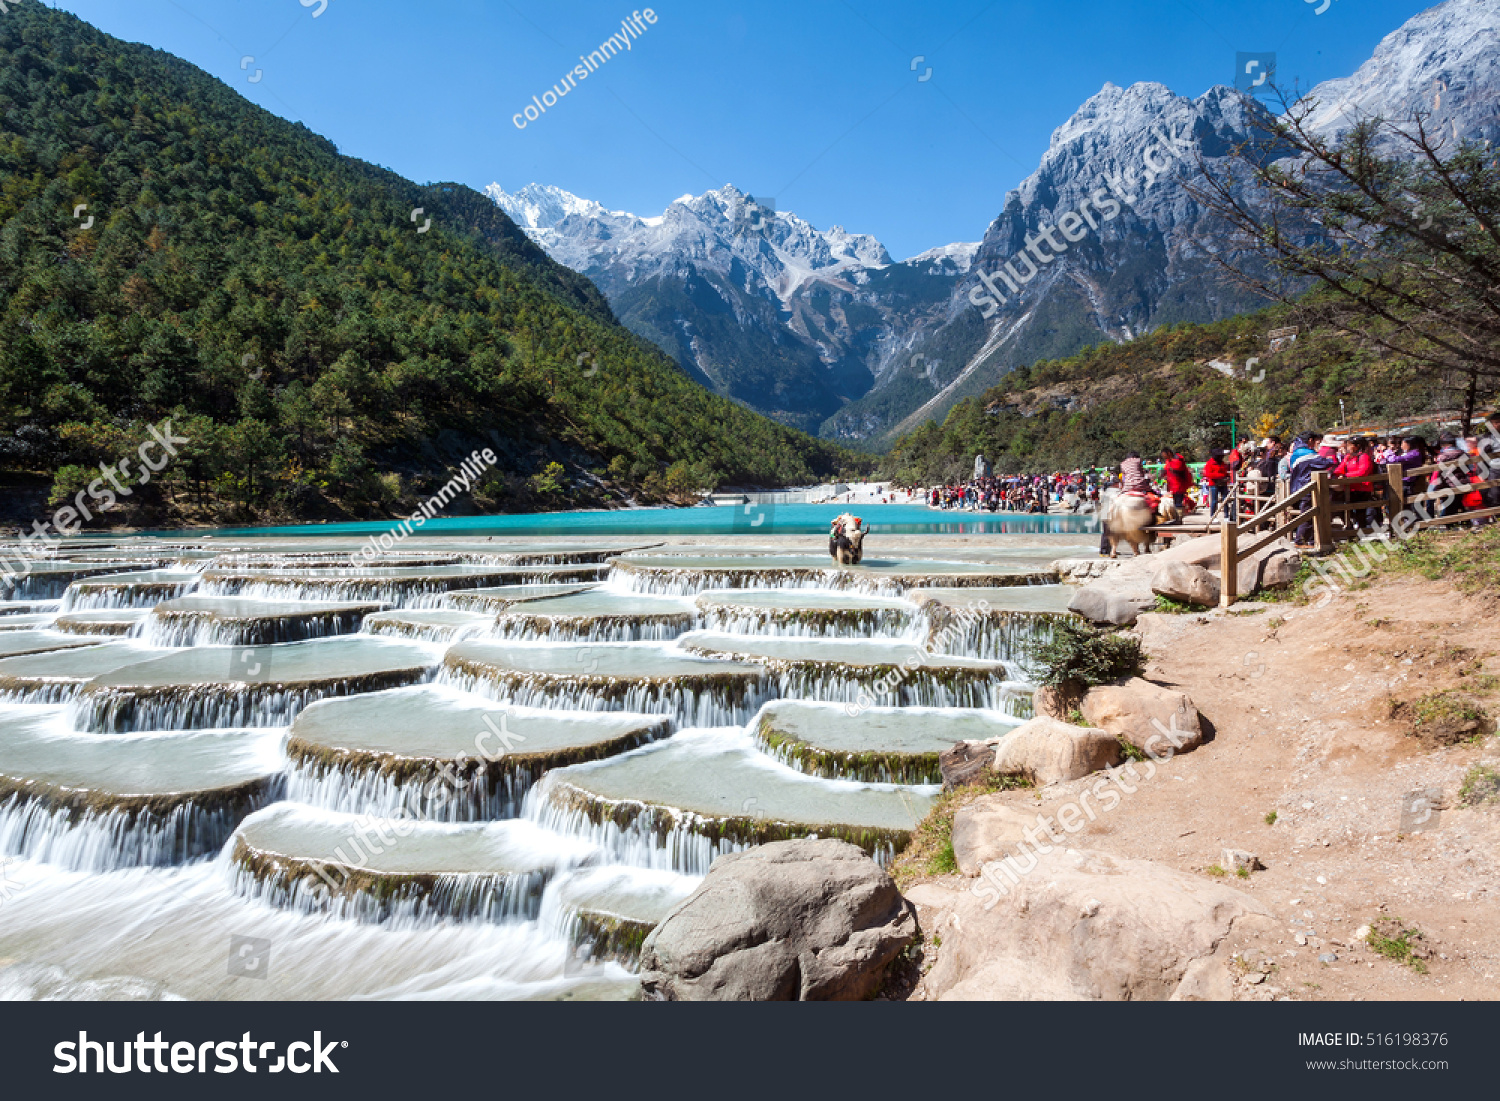 Blue Moon Valley Jade Dragon Snow Parks Outdoor Stock Image